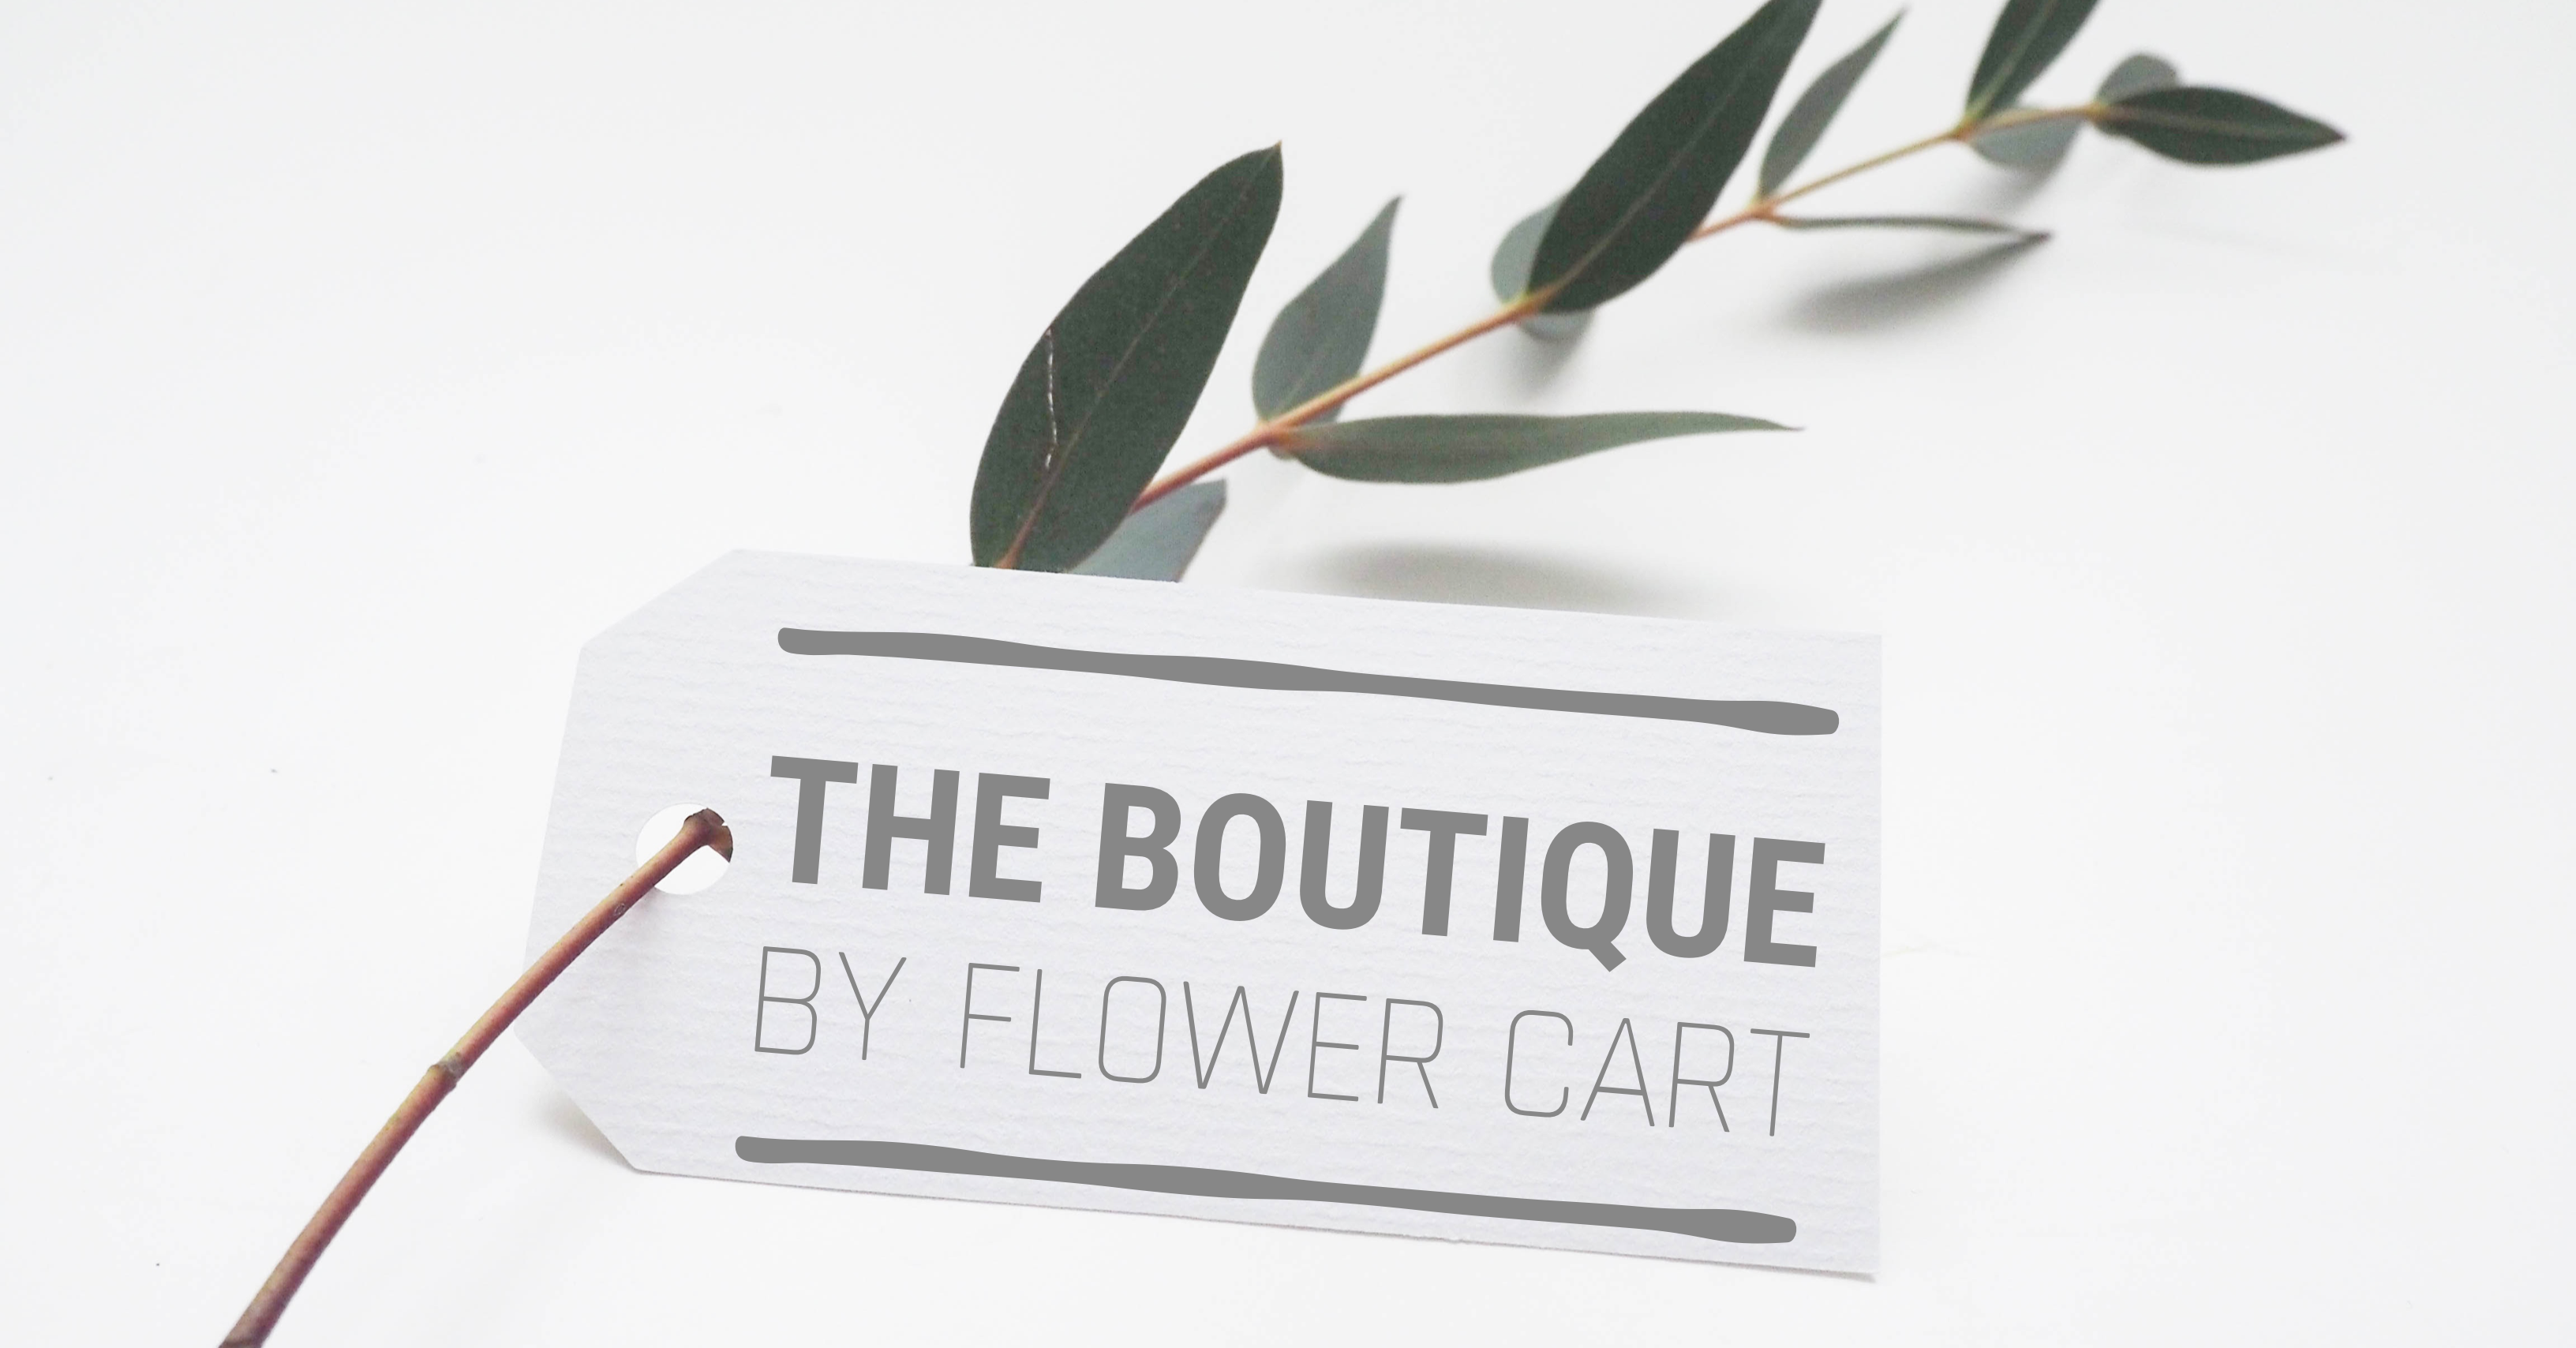 THE BOUTIQUE BY FLOWER CART